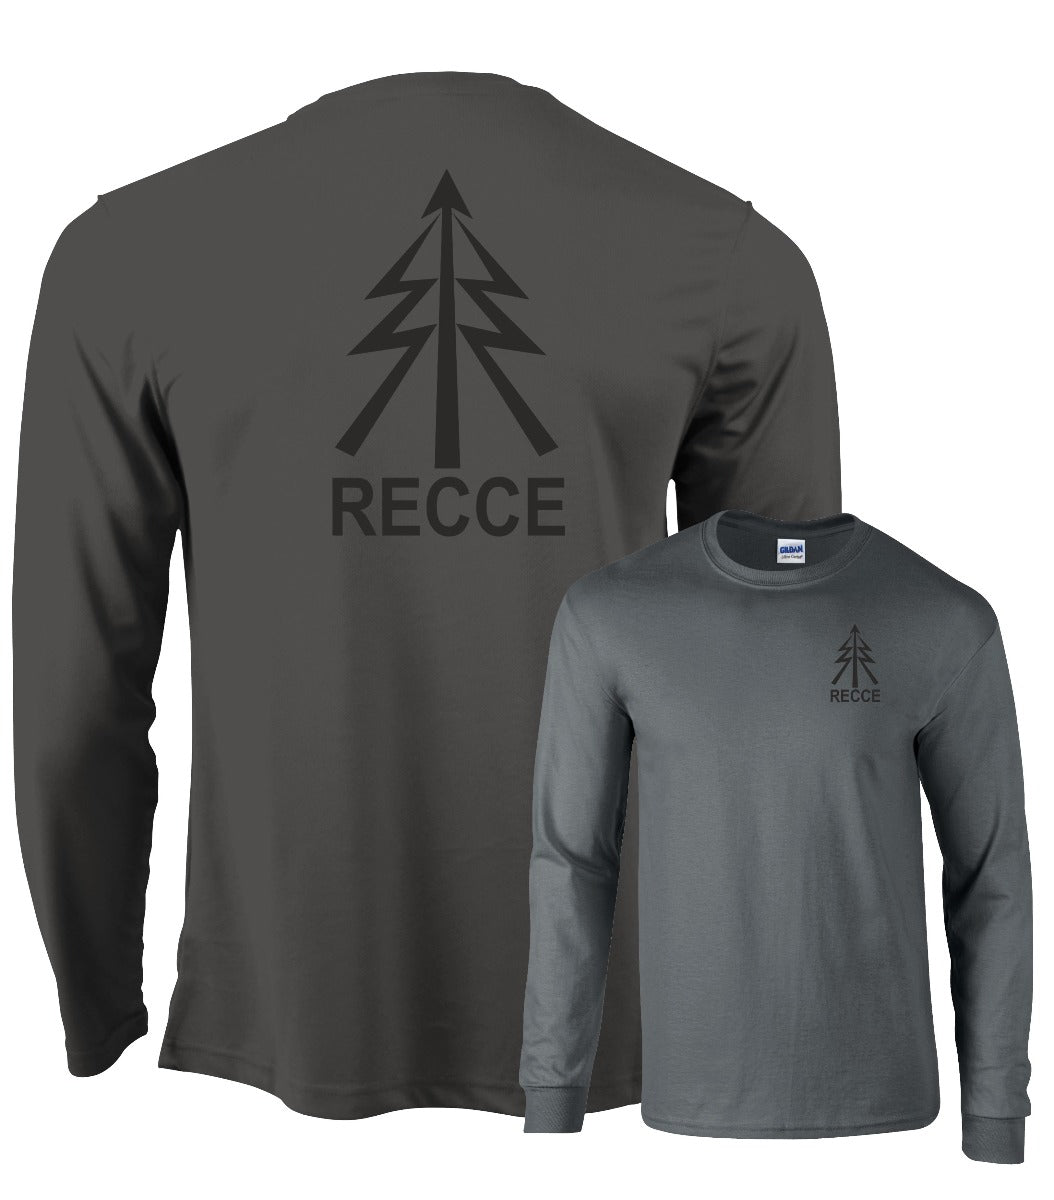 Double Printed RECCE Long sleeve Wicking T-Shirt